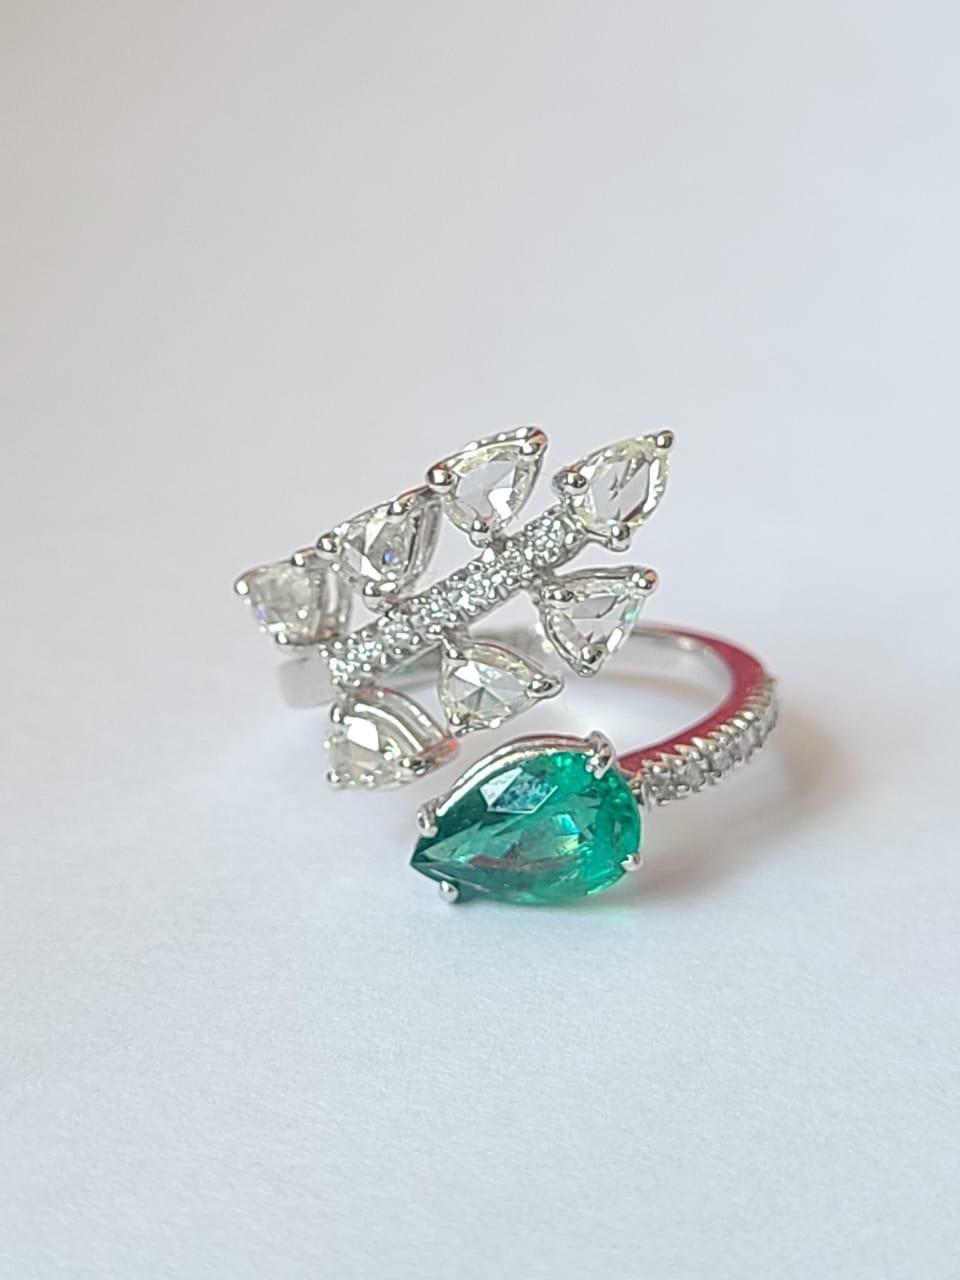 A very gorgeous and beautiful Emerald Engagement Ring set in 18K White Gold & Diamonds. The weight of the Pear shaped Emerald is 1.12 carats. The Emerald is of Zambian origin and is completely natural, without any treatment. The weight of the Rose